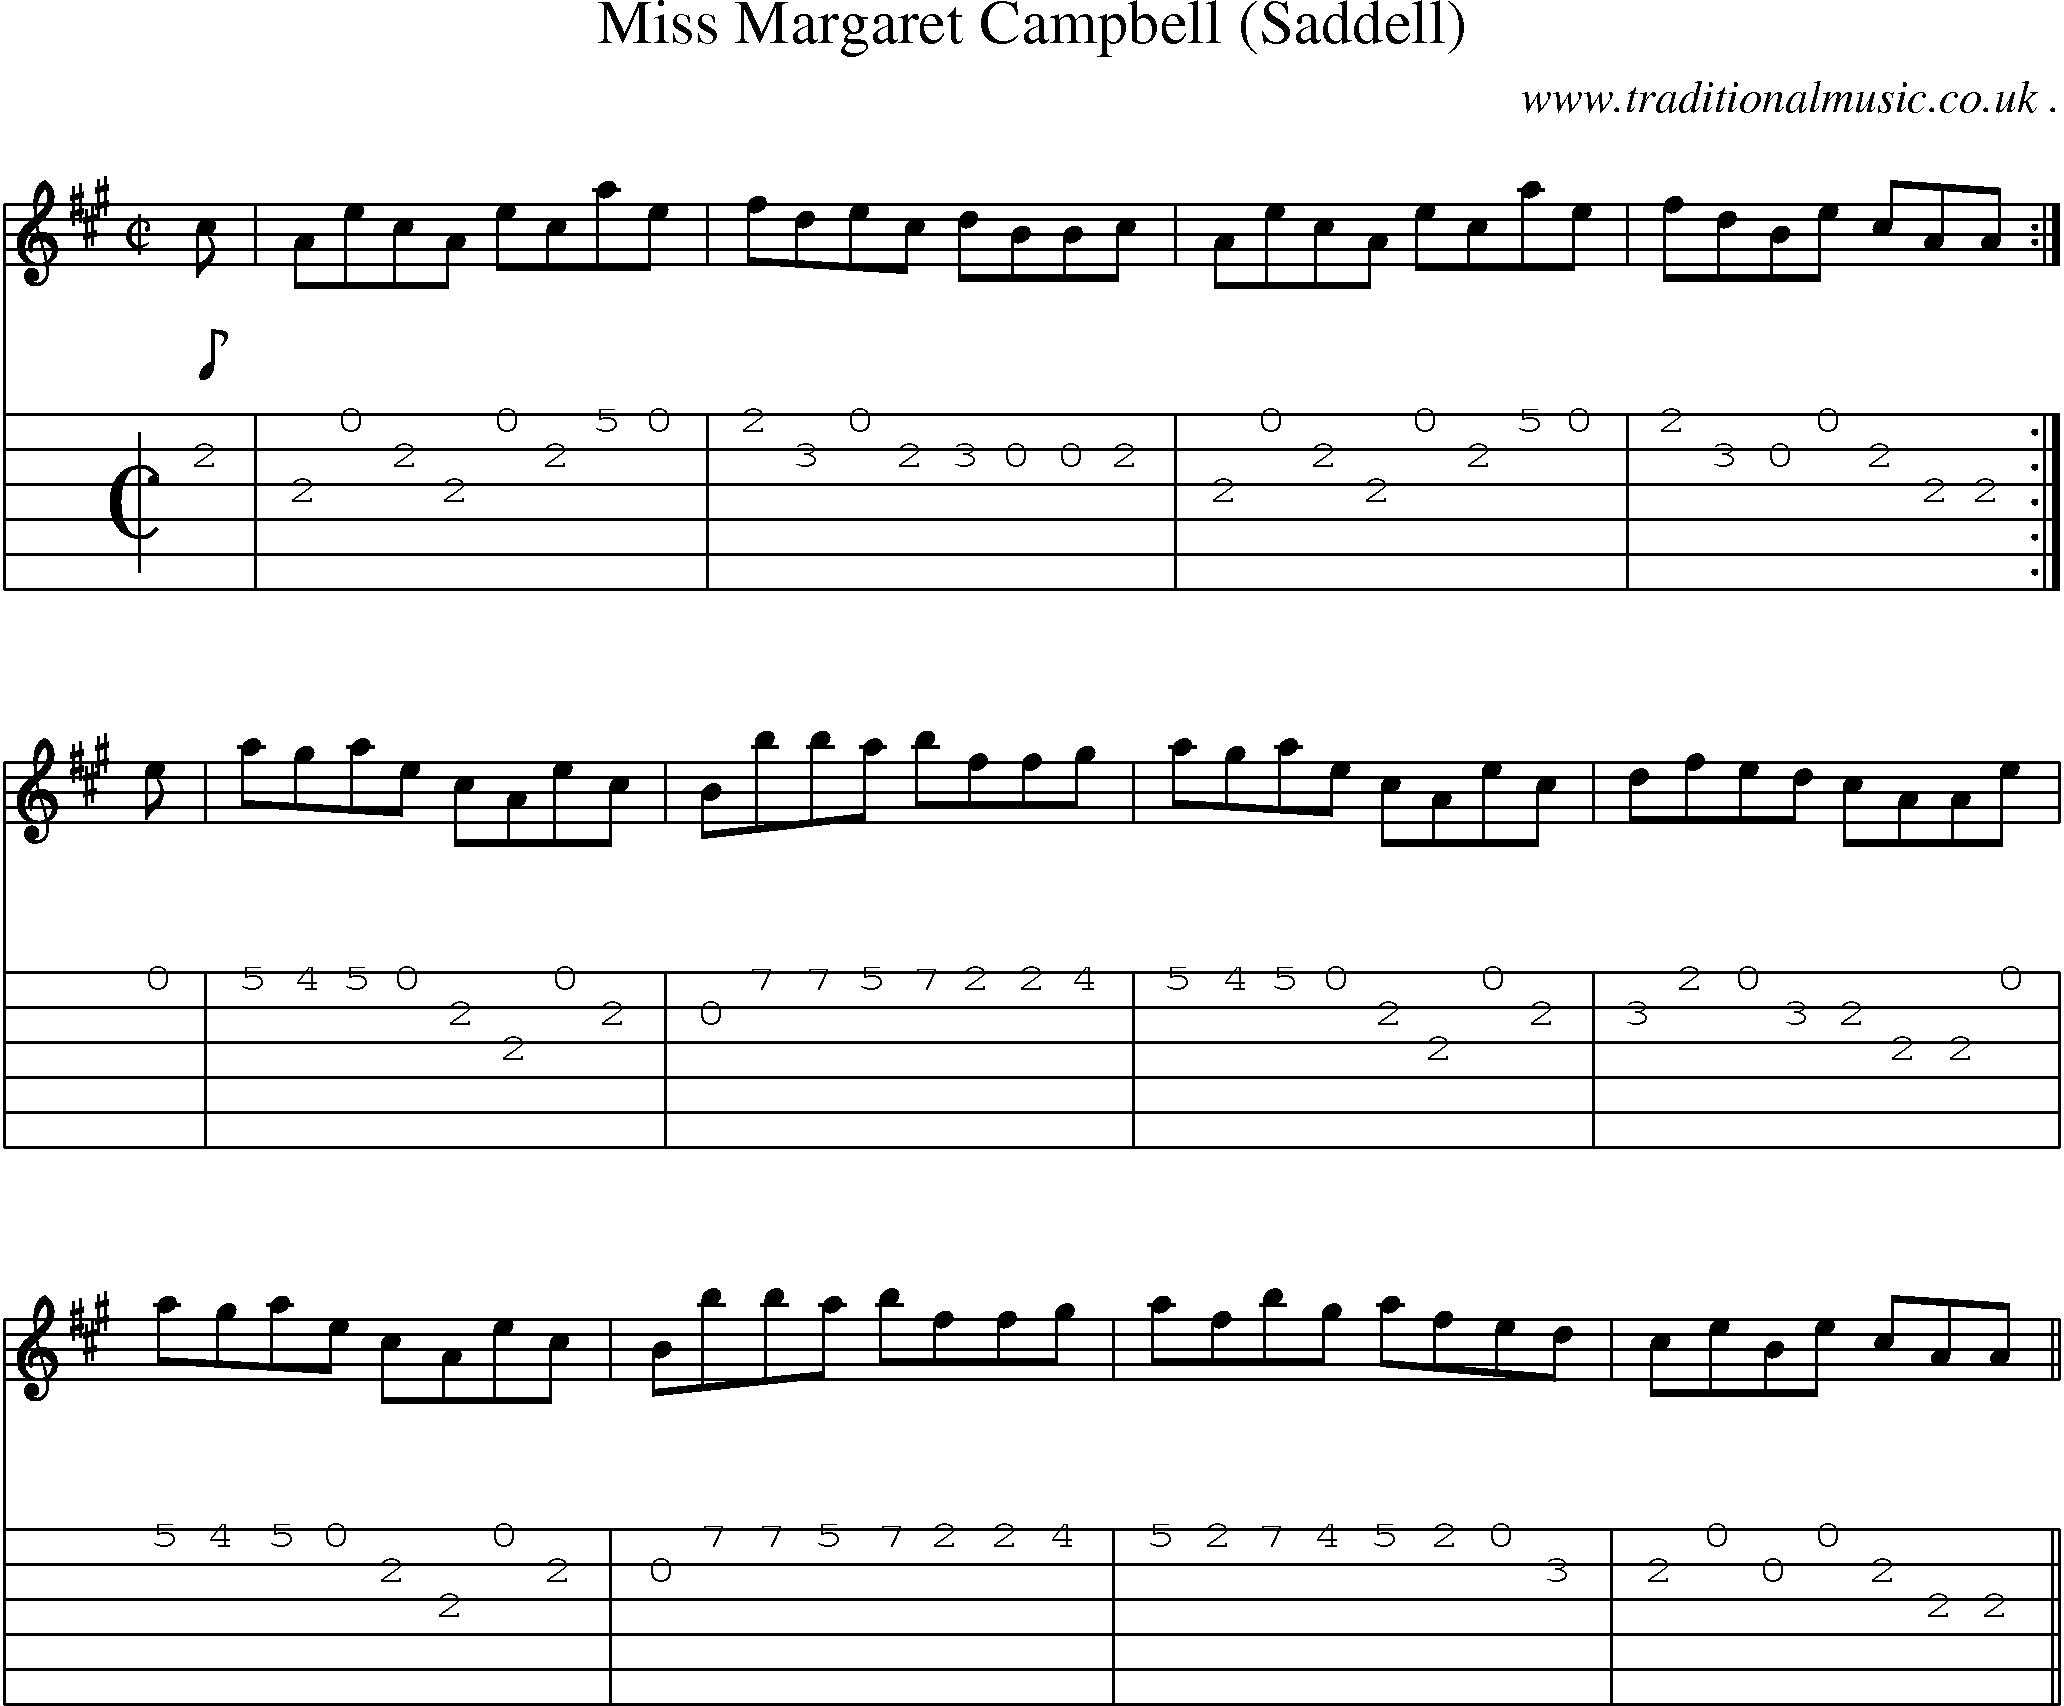 Sheet-music  score, Chords and Guitar Tabs for Miss Margaret Campbell Saddell